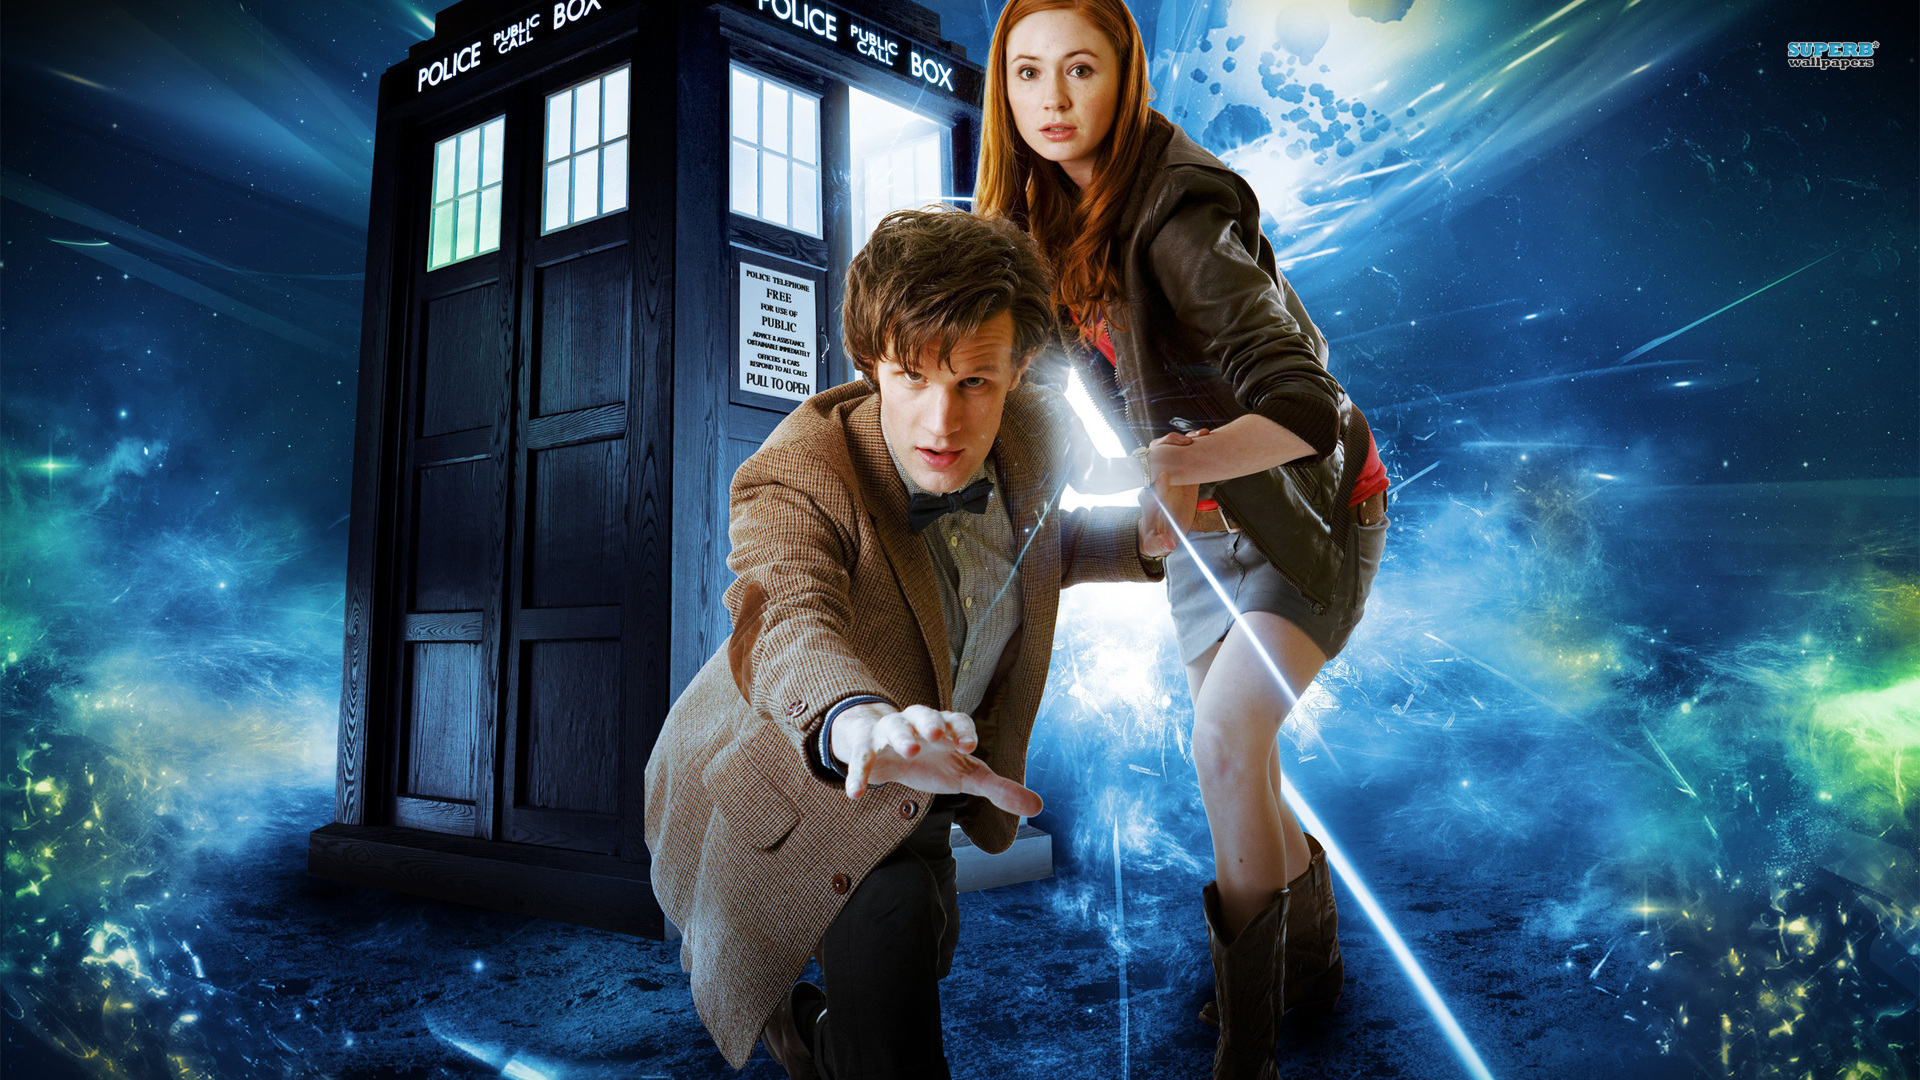 Wallpaper - Doctor Who Amy Pond - HD Wallpaper 